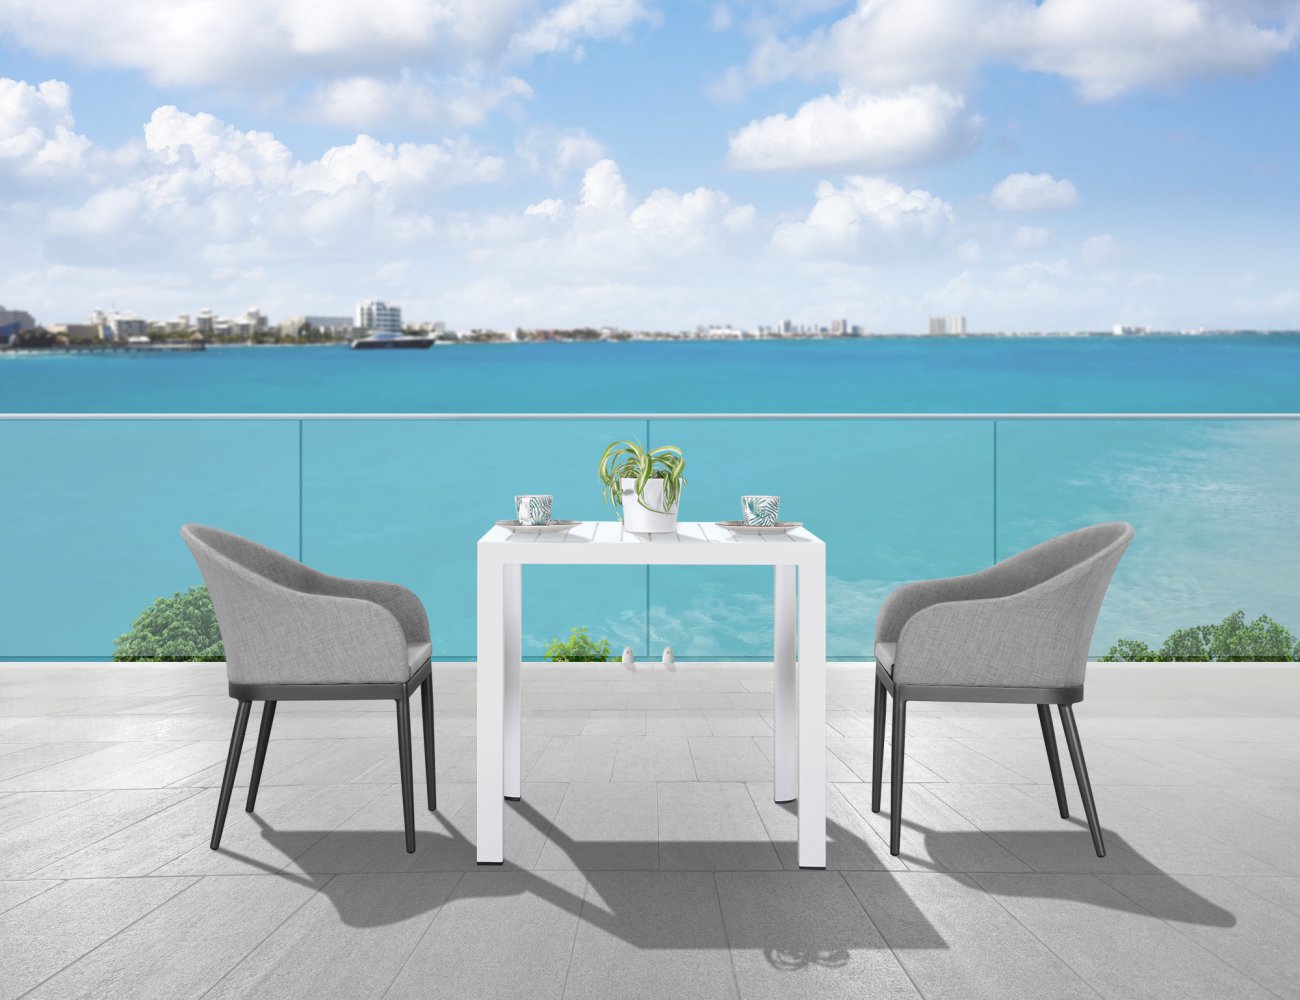 1× Arcus Outdoor Table +2×Outdoor Chair